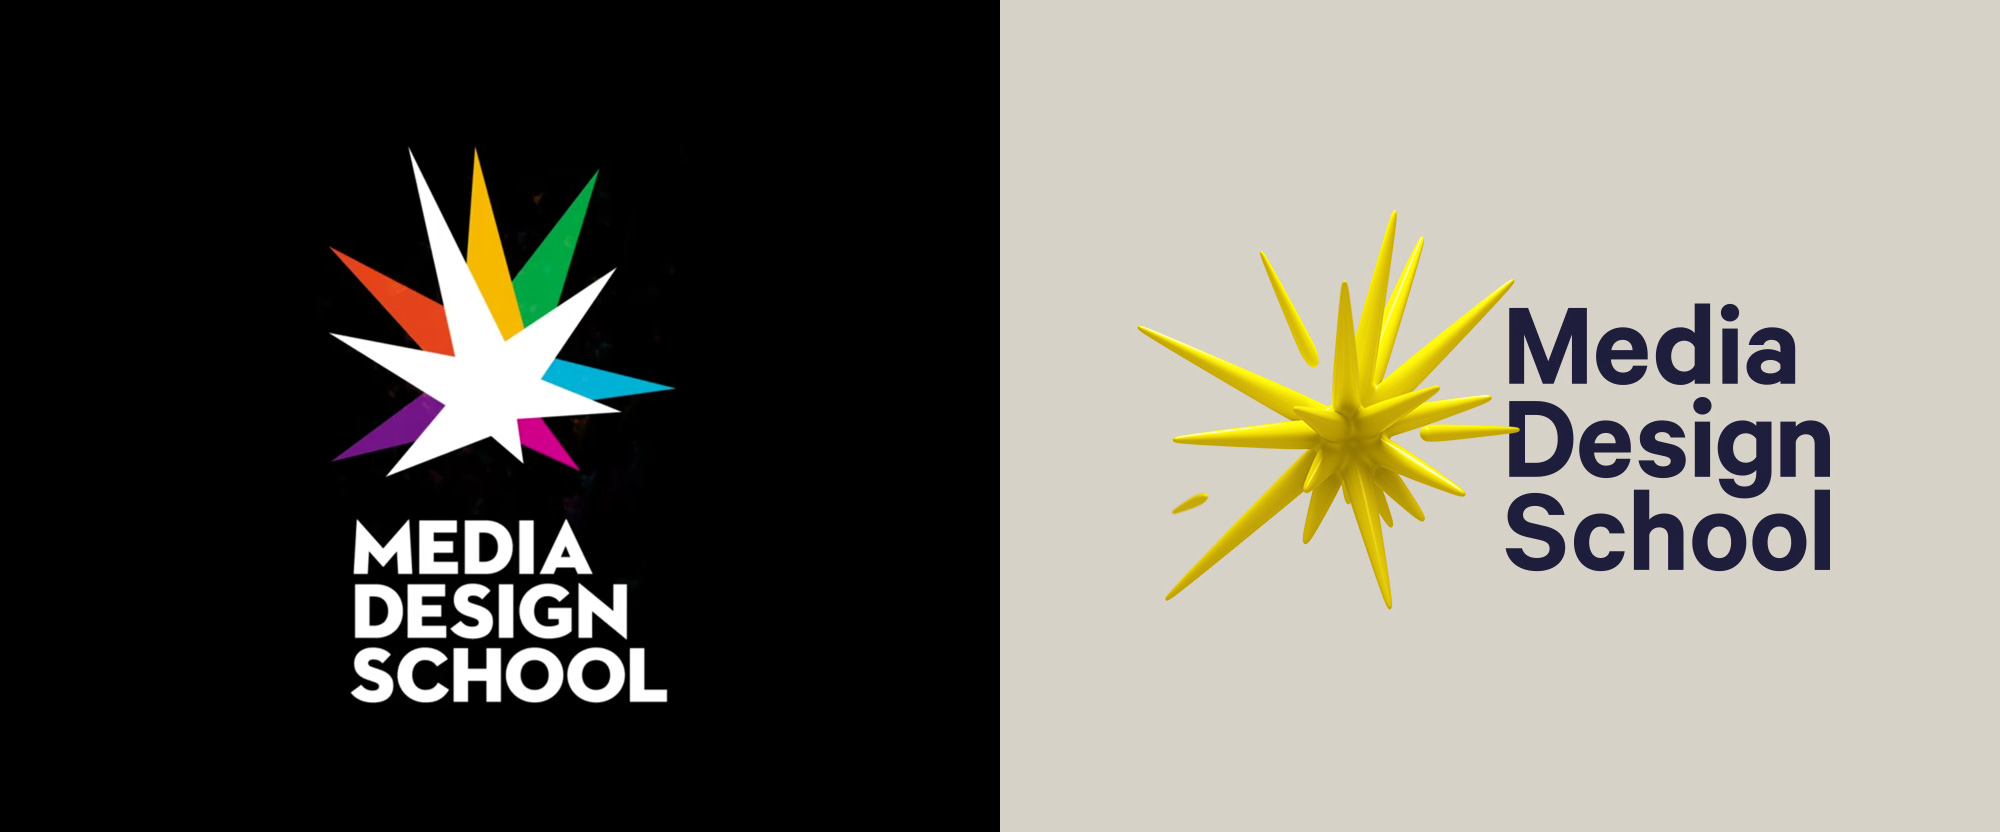 New Logo and Identity for Media Design School by SomeOne